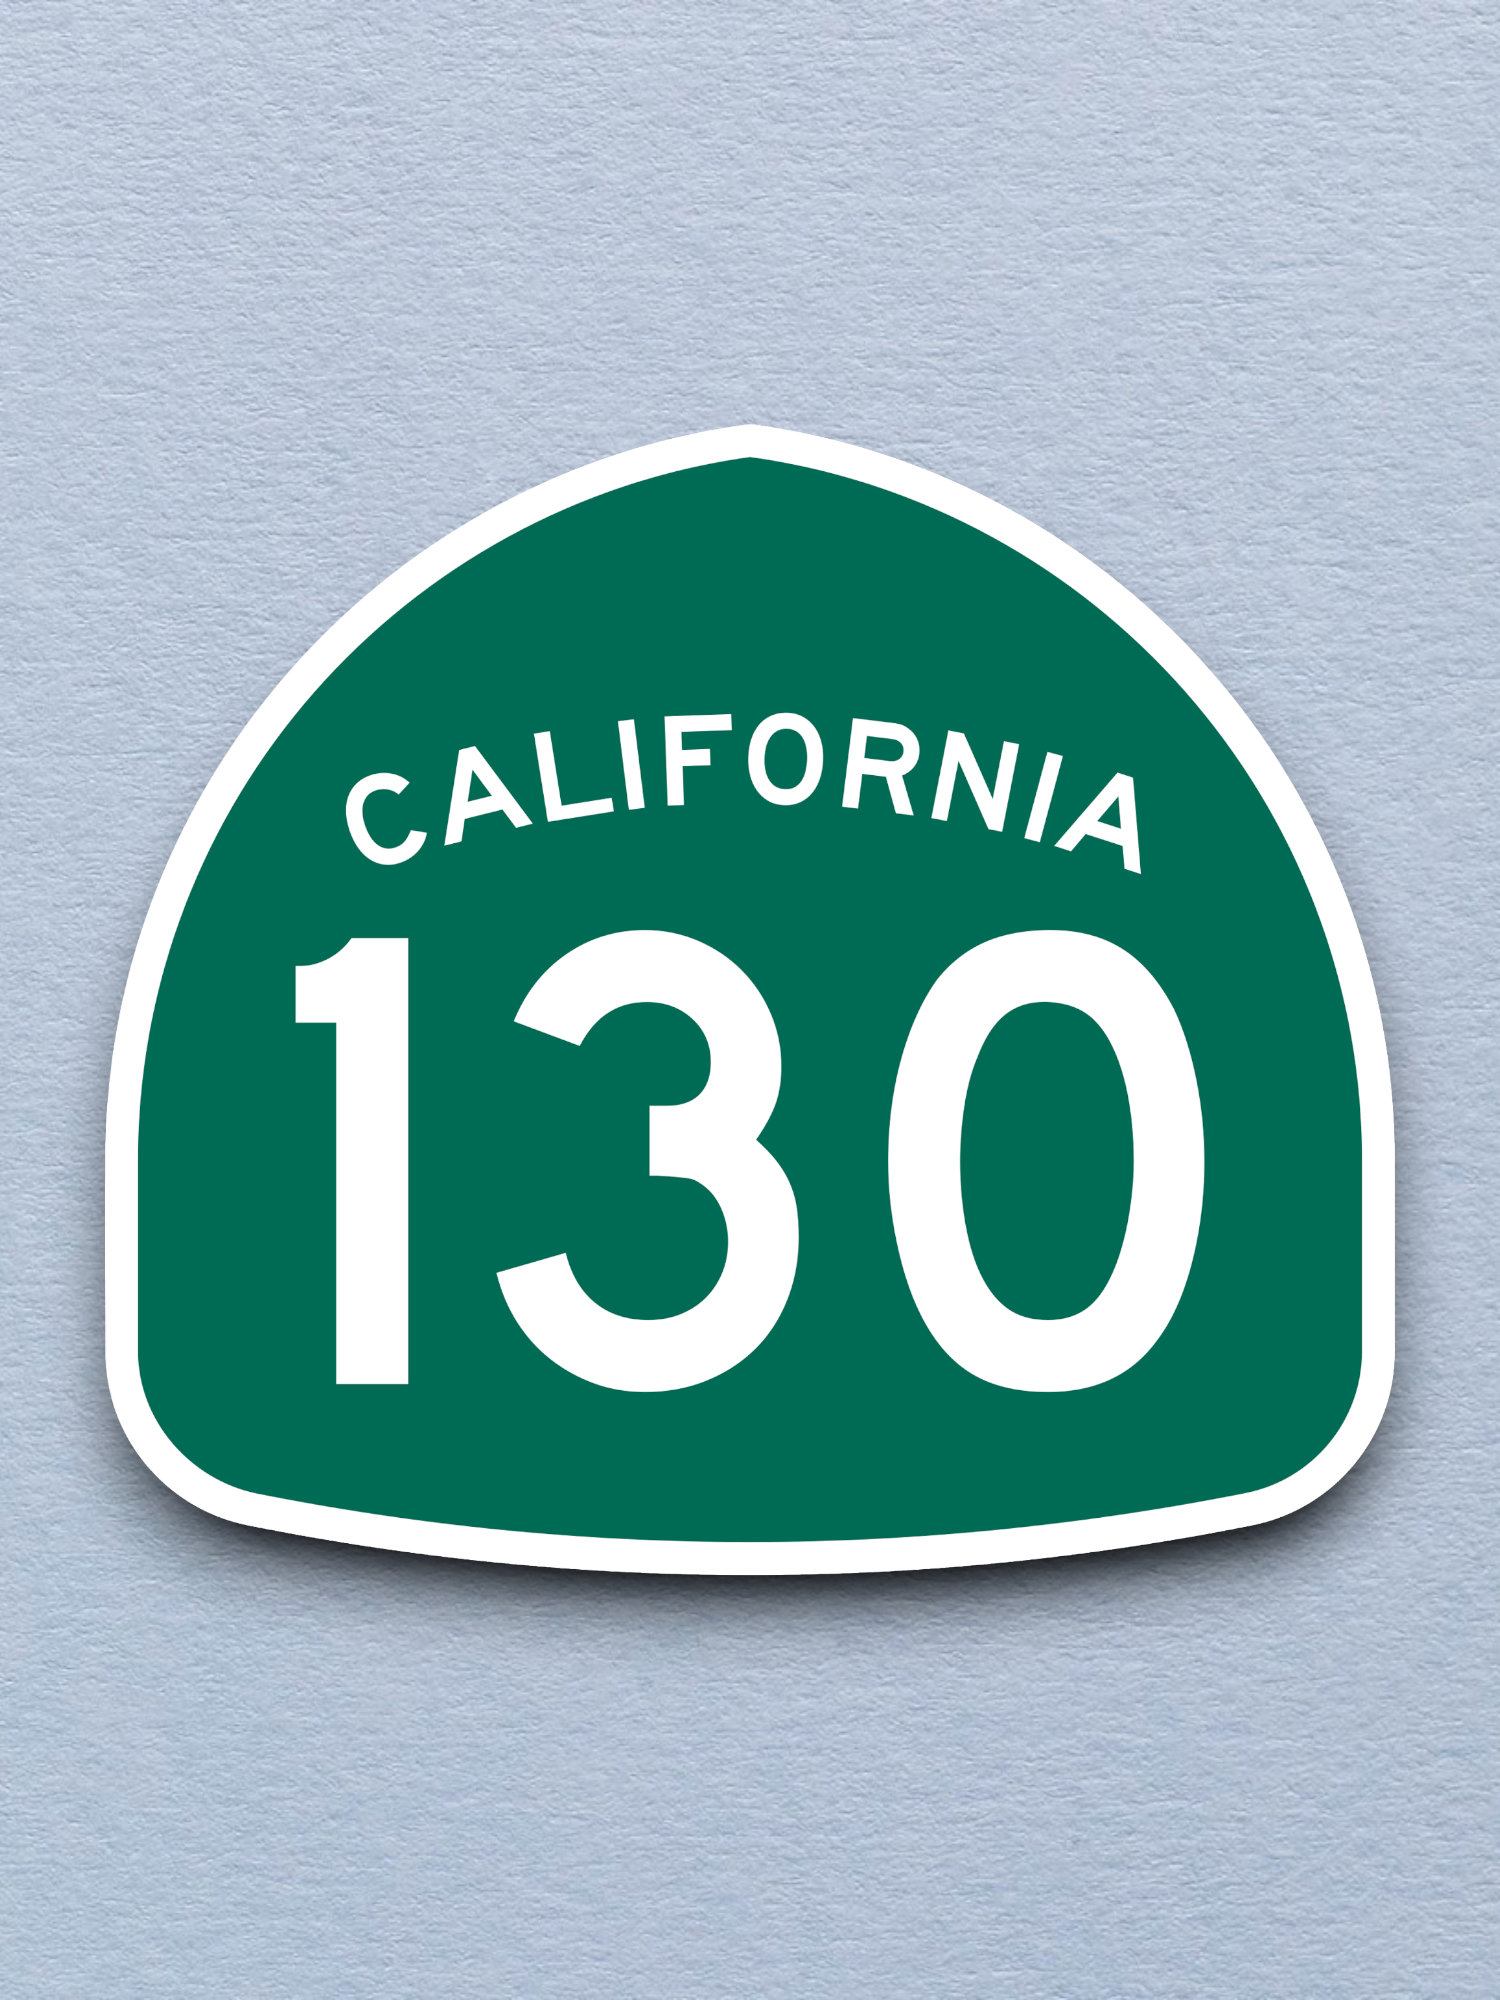 California State Route 130 Road Sign Sticker